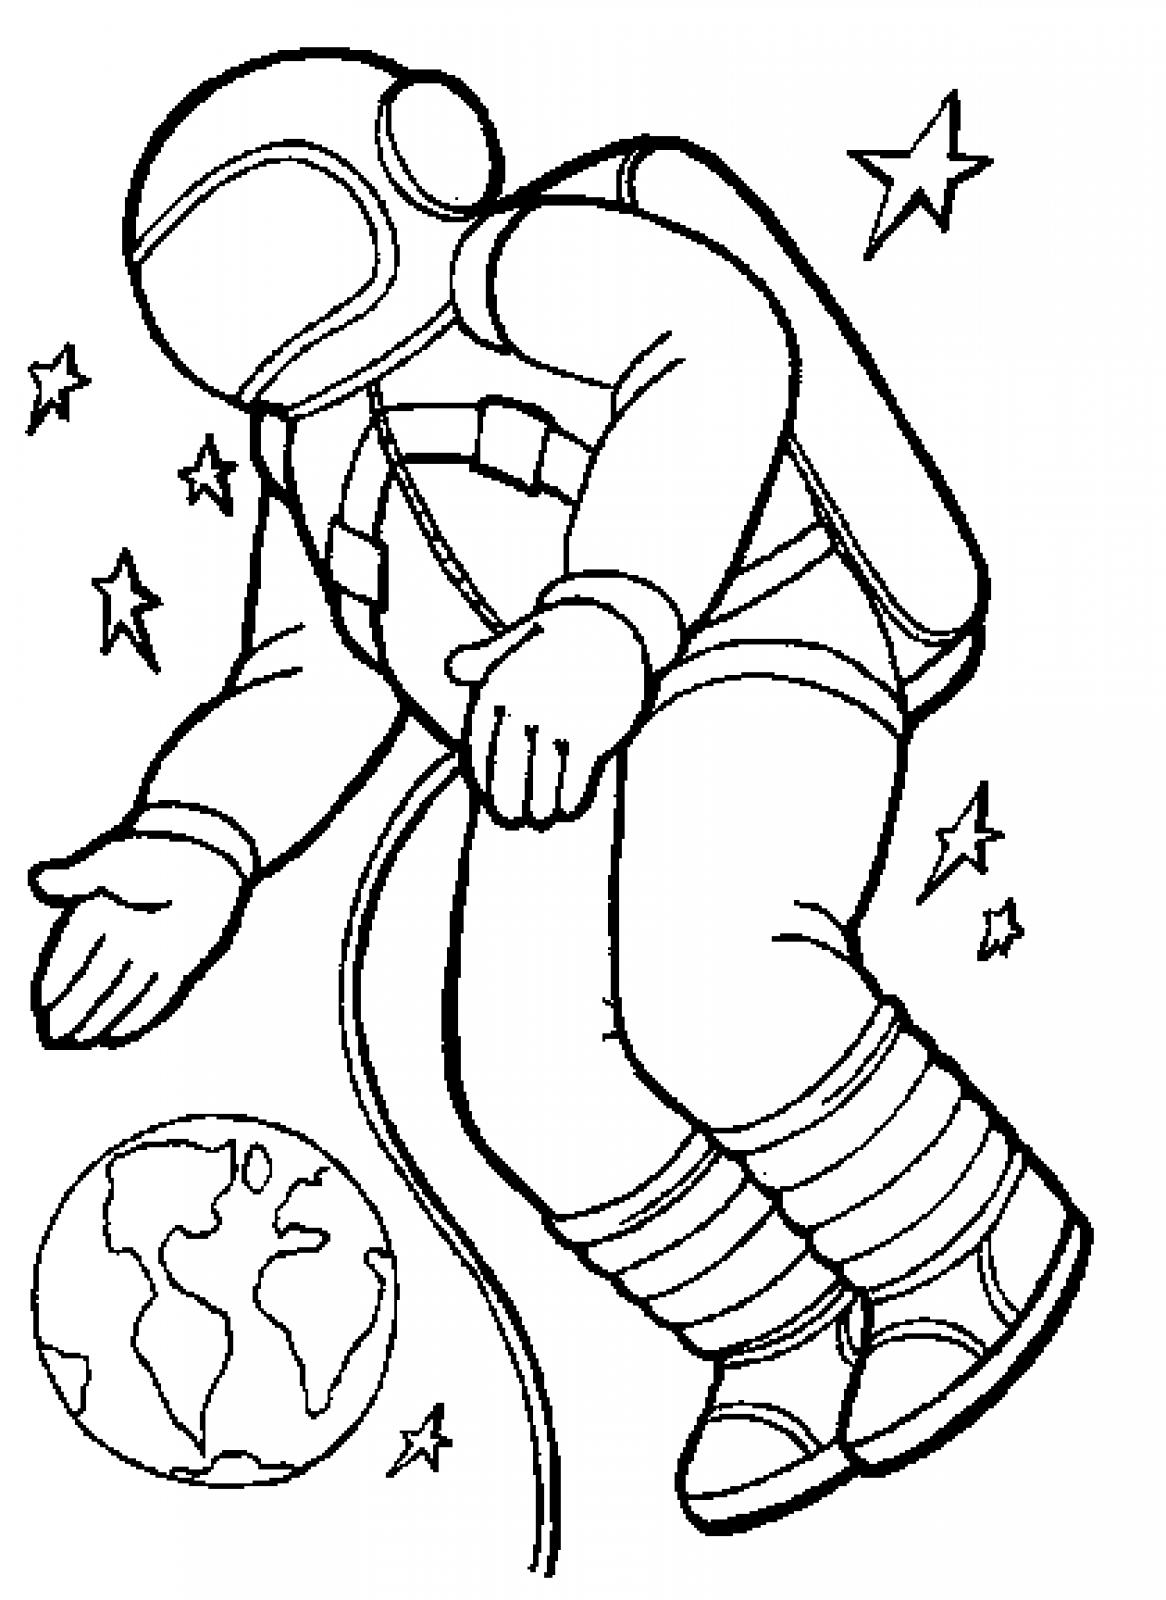 Astronaut coloring pages to download and print for free